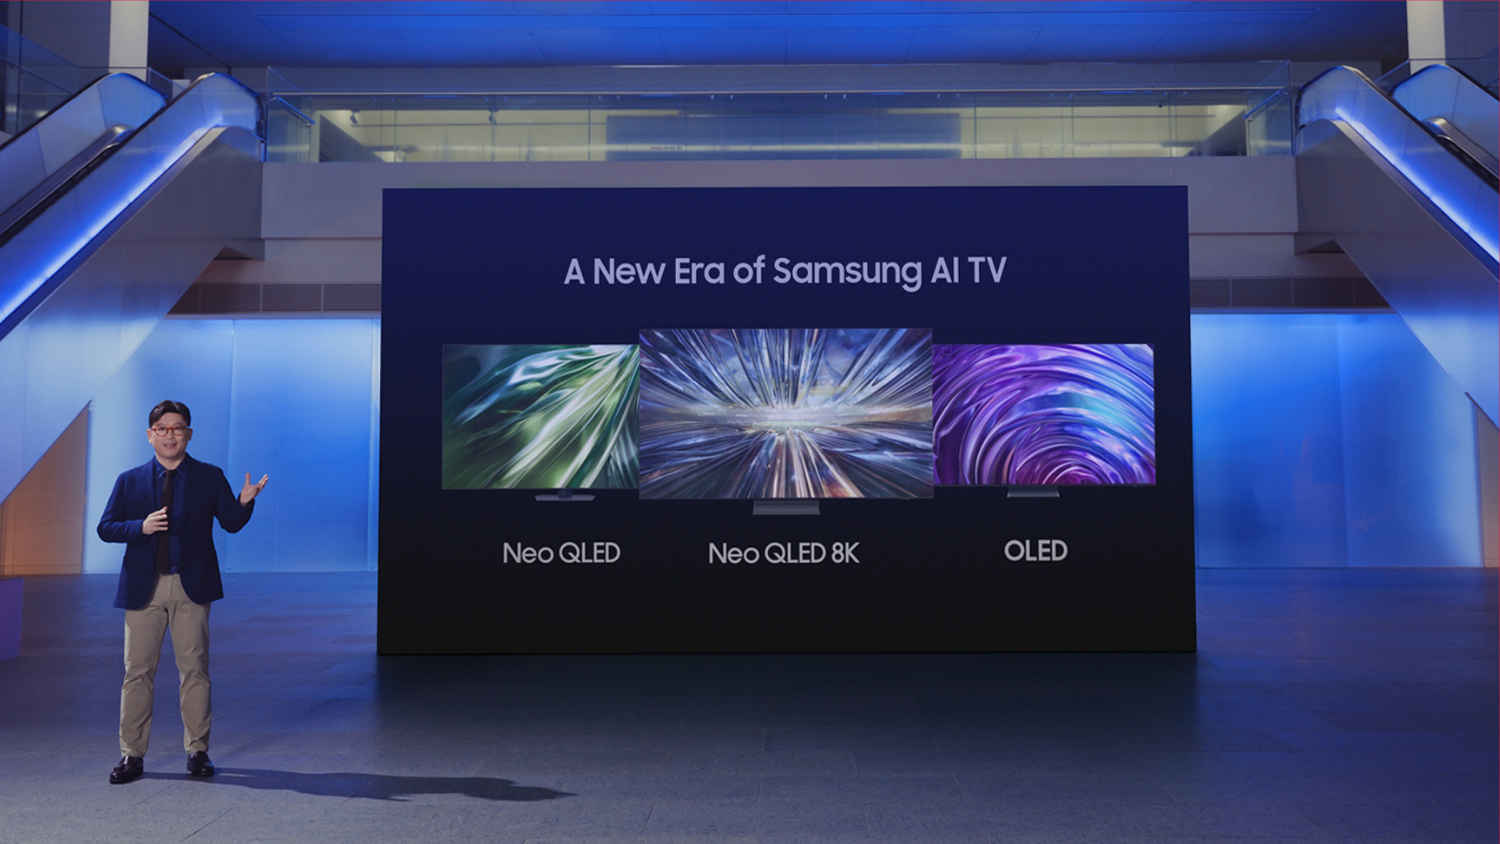 Samsung Neo QLED AI TVs launched: Here are the features, prices, and all you need to know